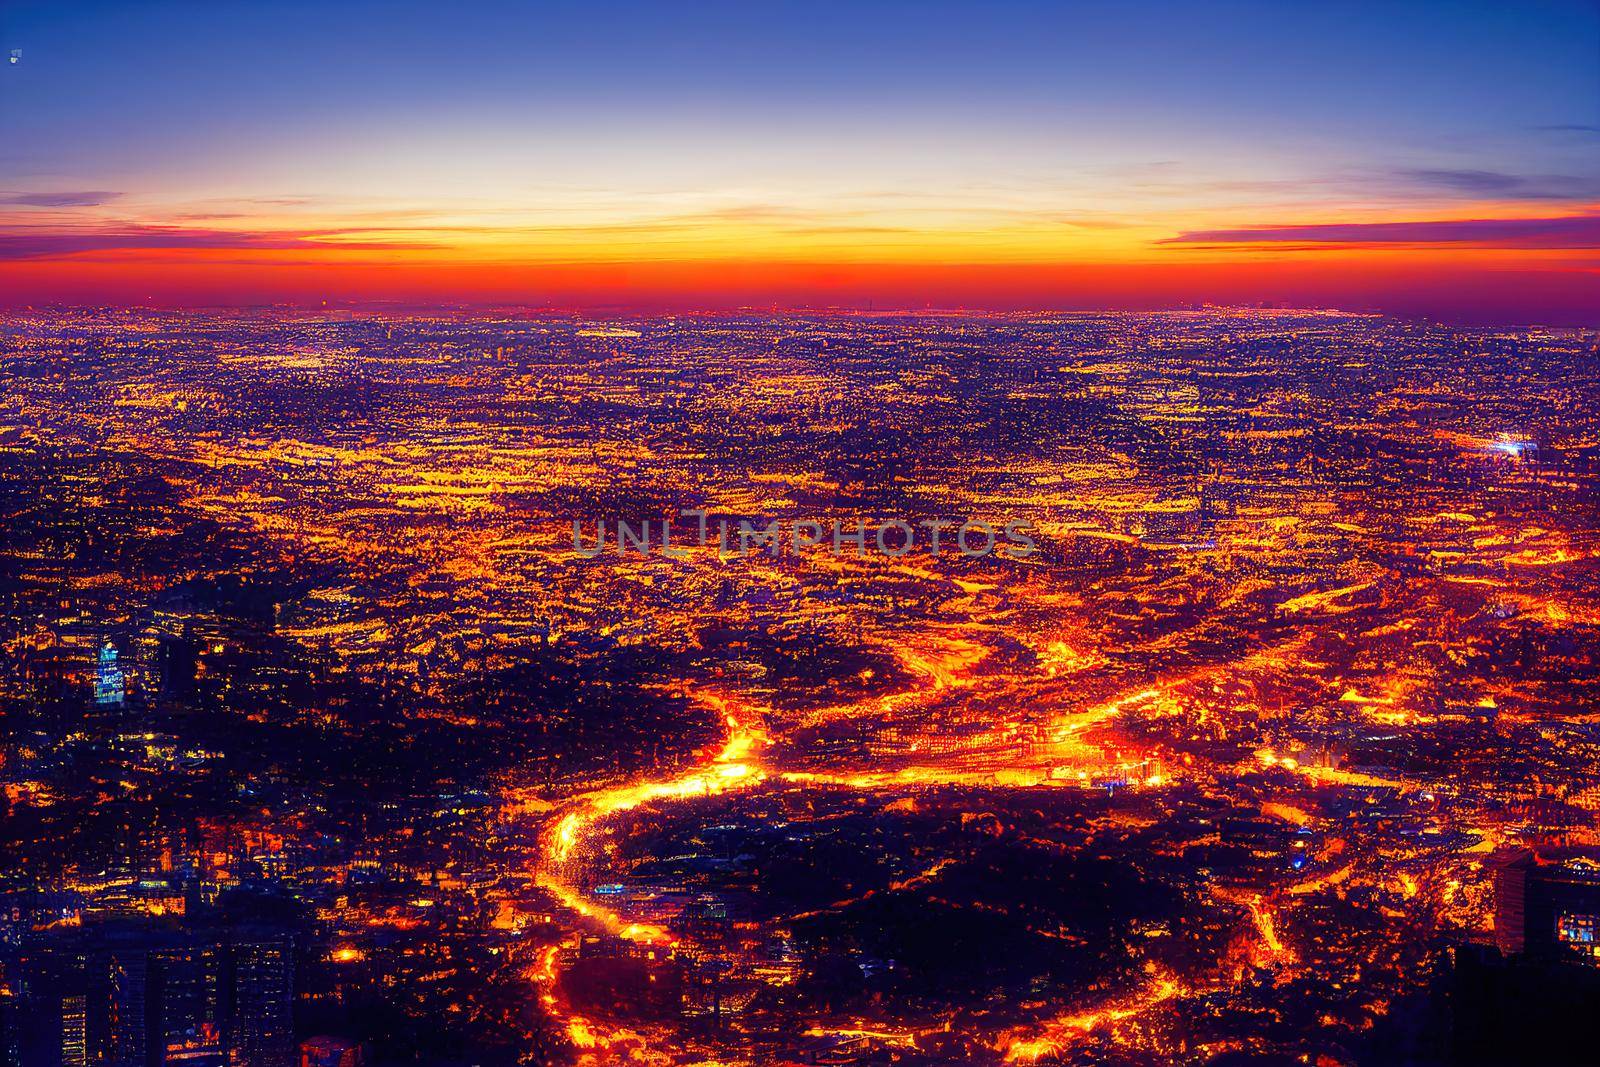 anime style, A beautiful and dramatic panoramic photograph of the Johannesburg city skyline taken on a golden evening after sunset , Anime style U1 1 by 2ragon